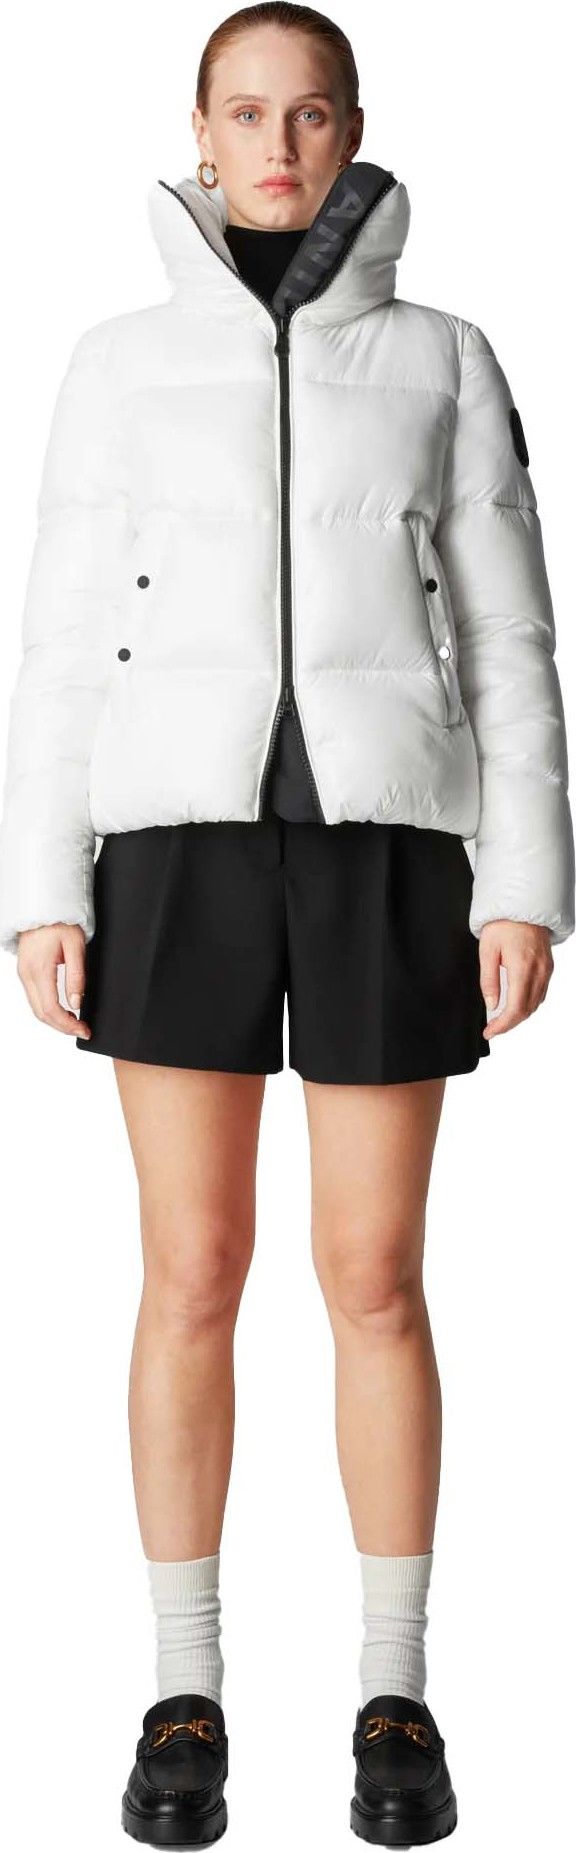 Save the Duck Women's Animal Free Puffer Jacket Isla Off White Save the Duck